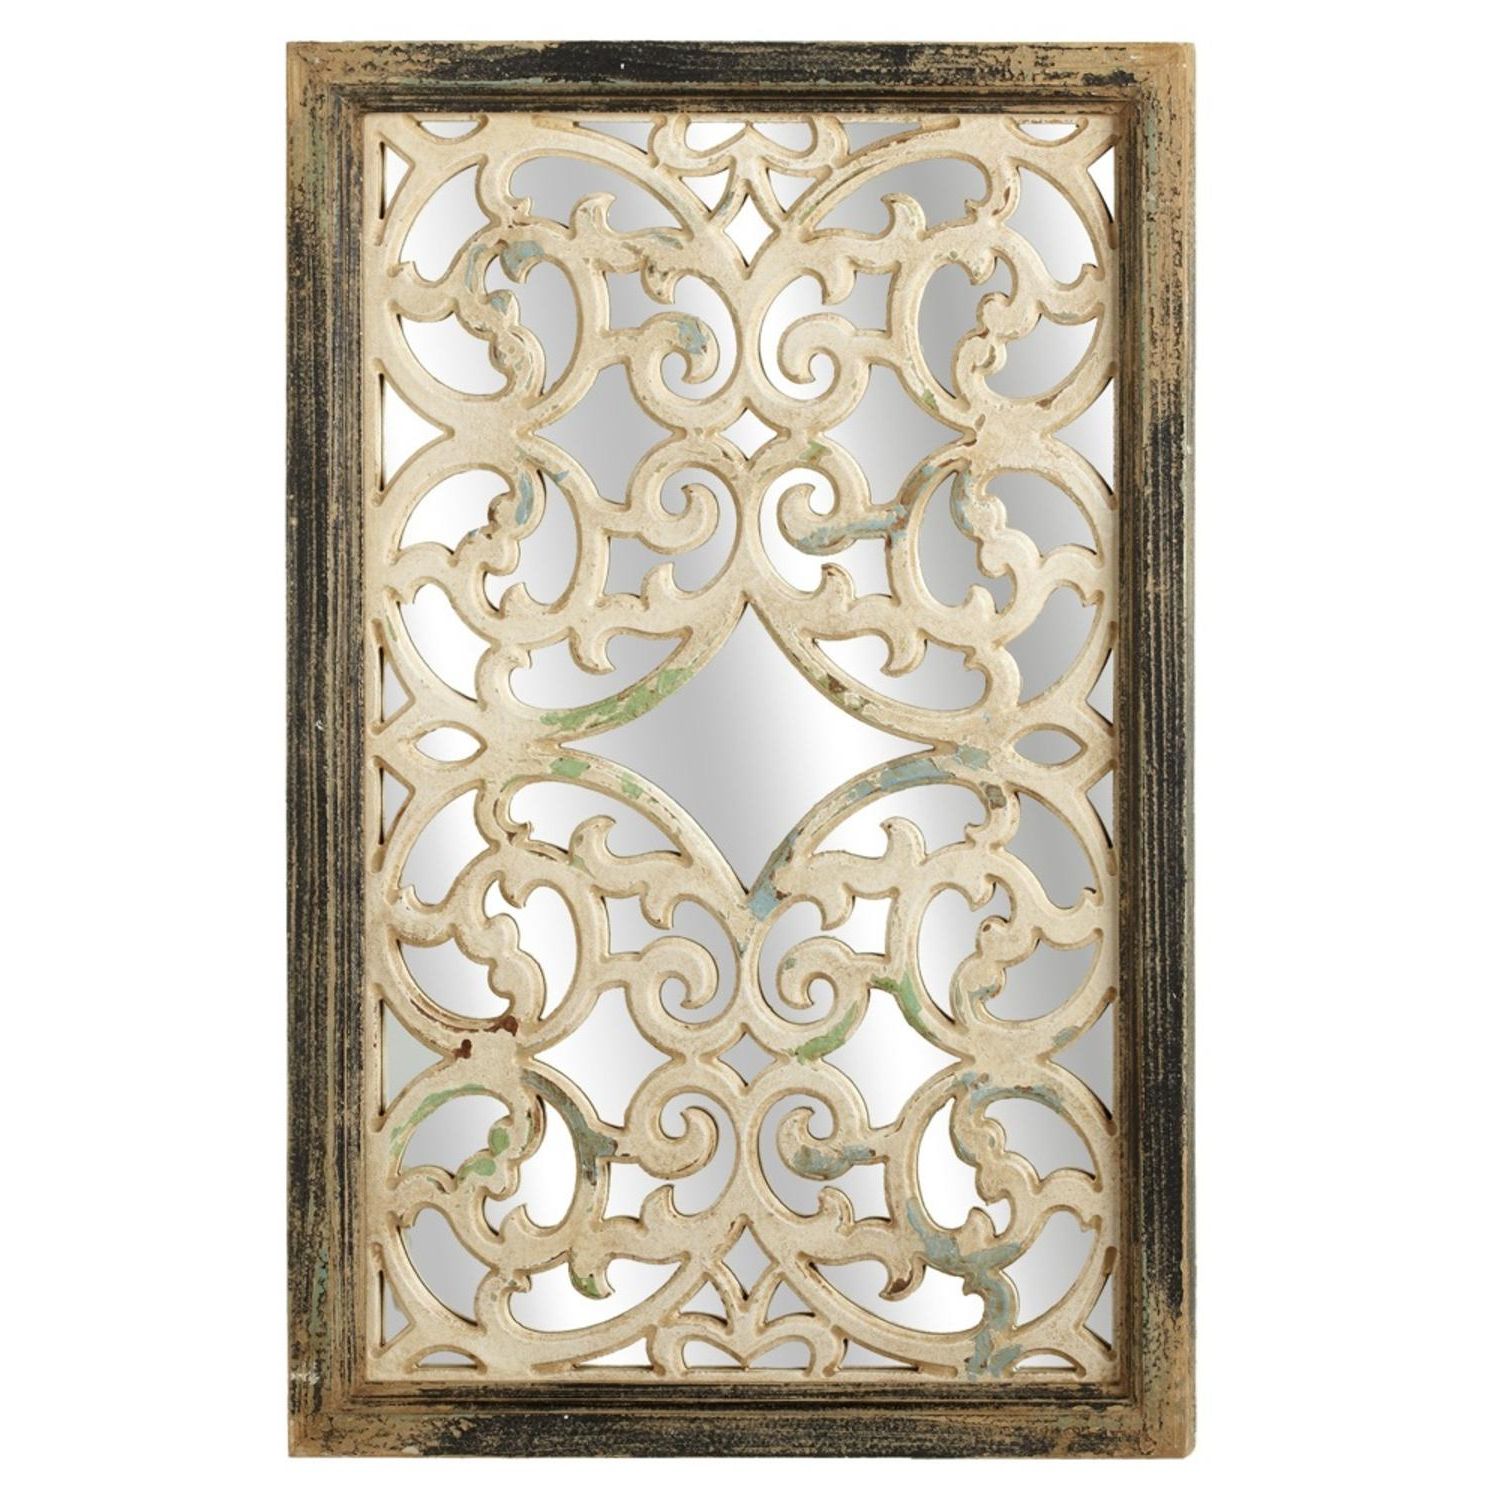 Black Wood Wall Mirrors Throughout 2020 34" Black And White Scroll Inlaid Distressed Wooden Framed Wall Mirror (View 4 of 15)